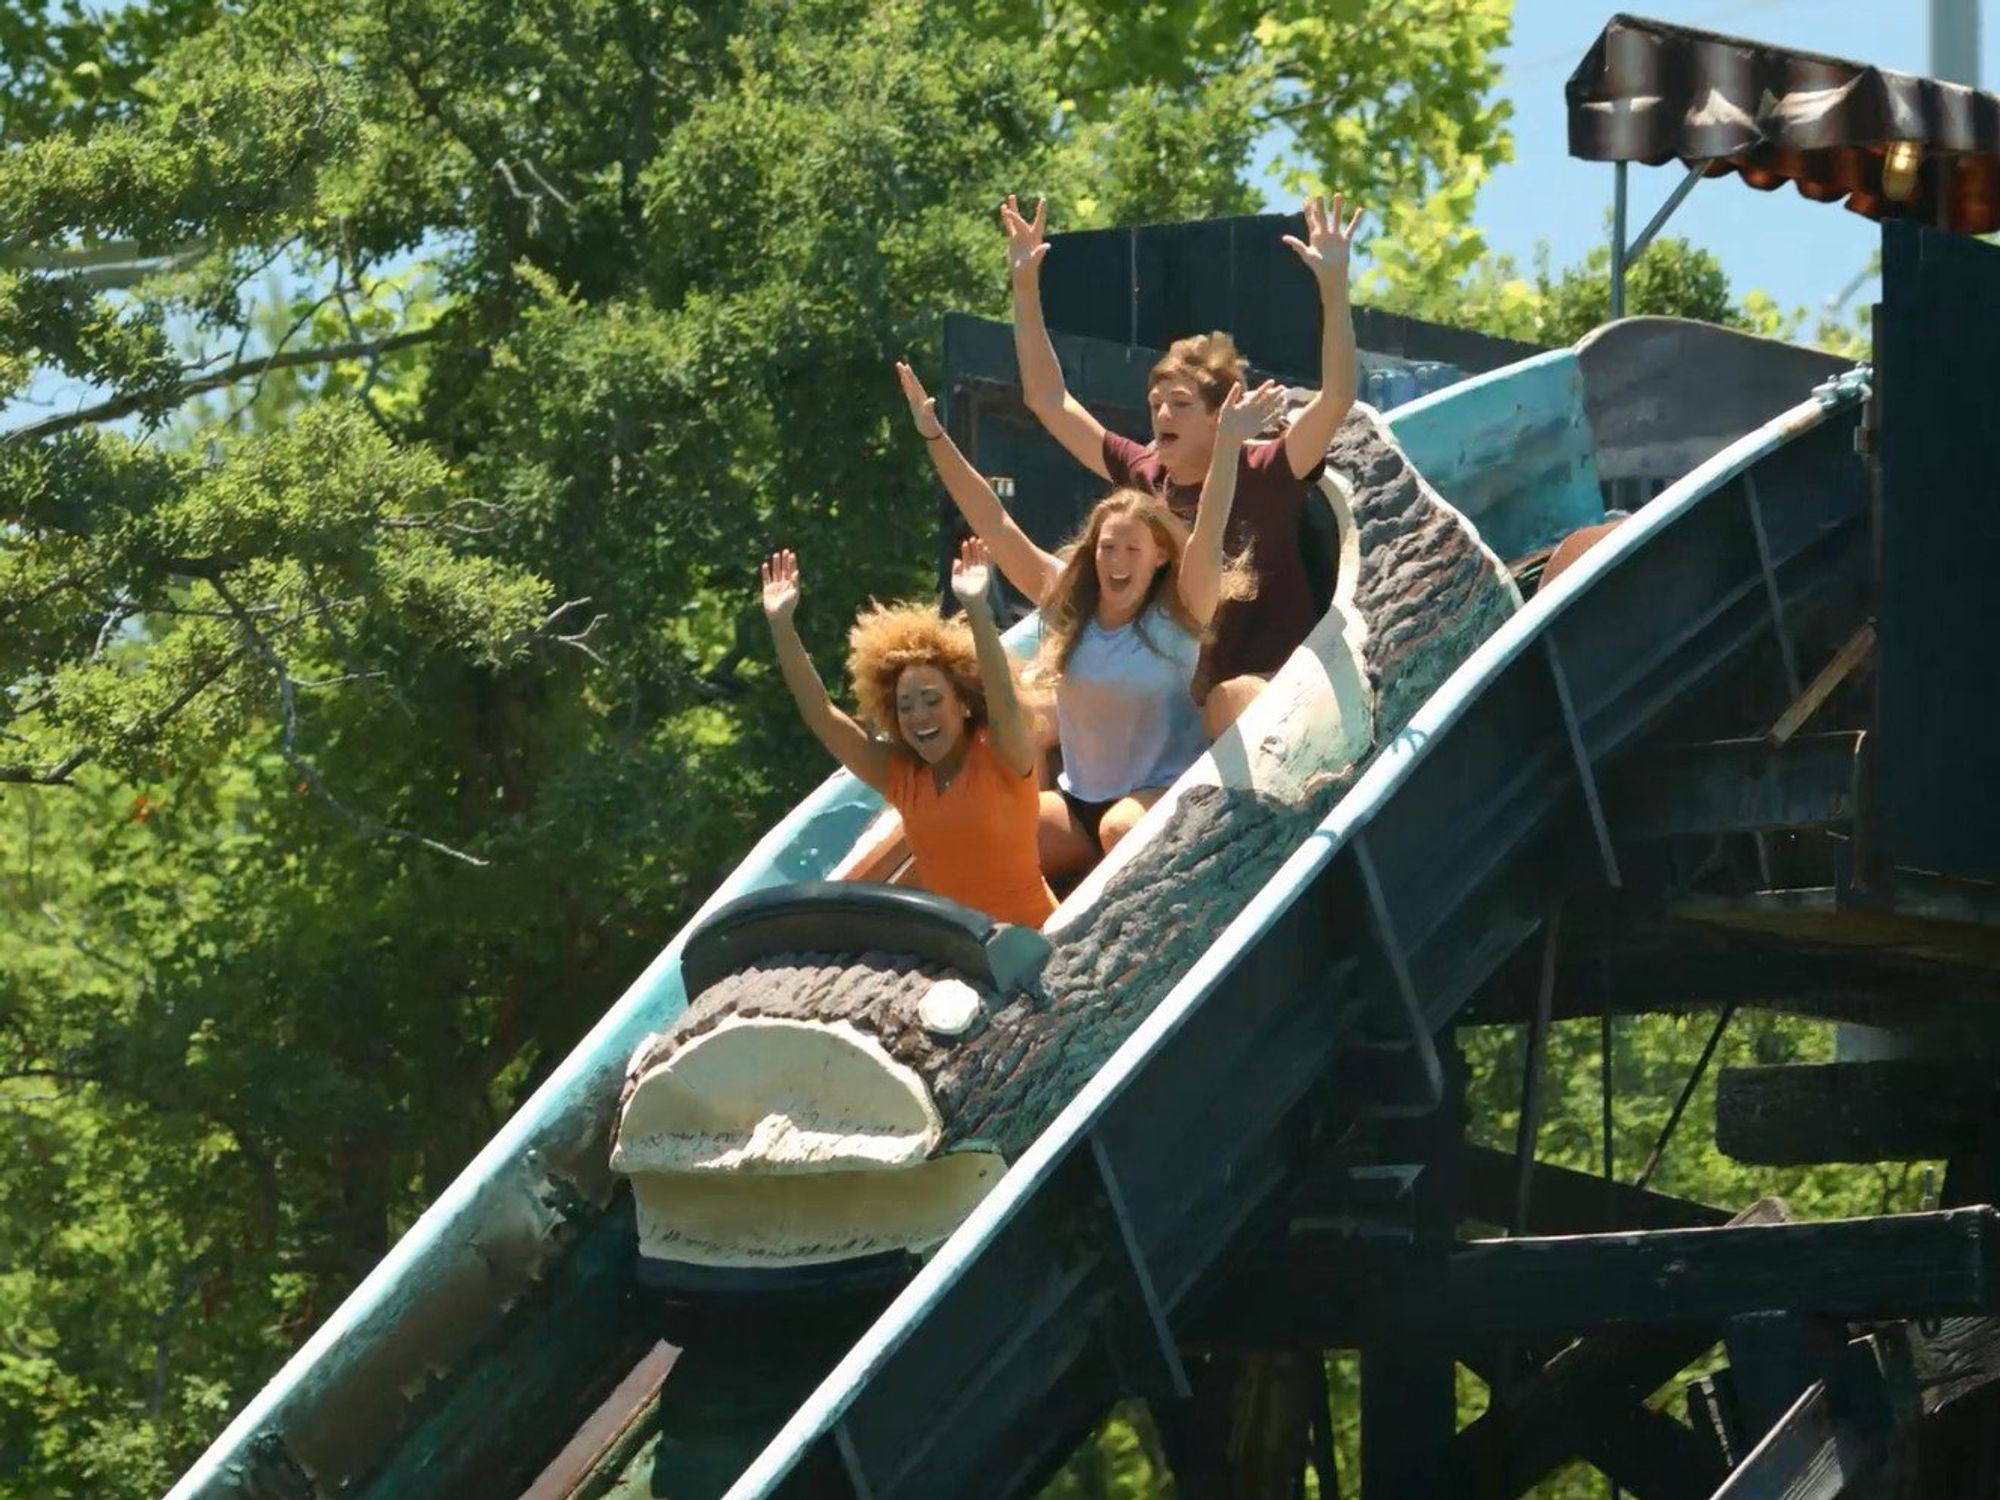 Log flume at Six Flags Over Texas